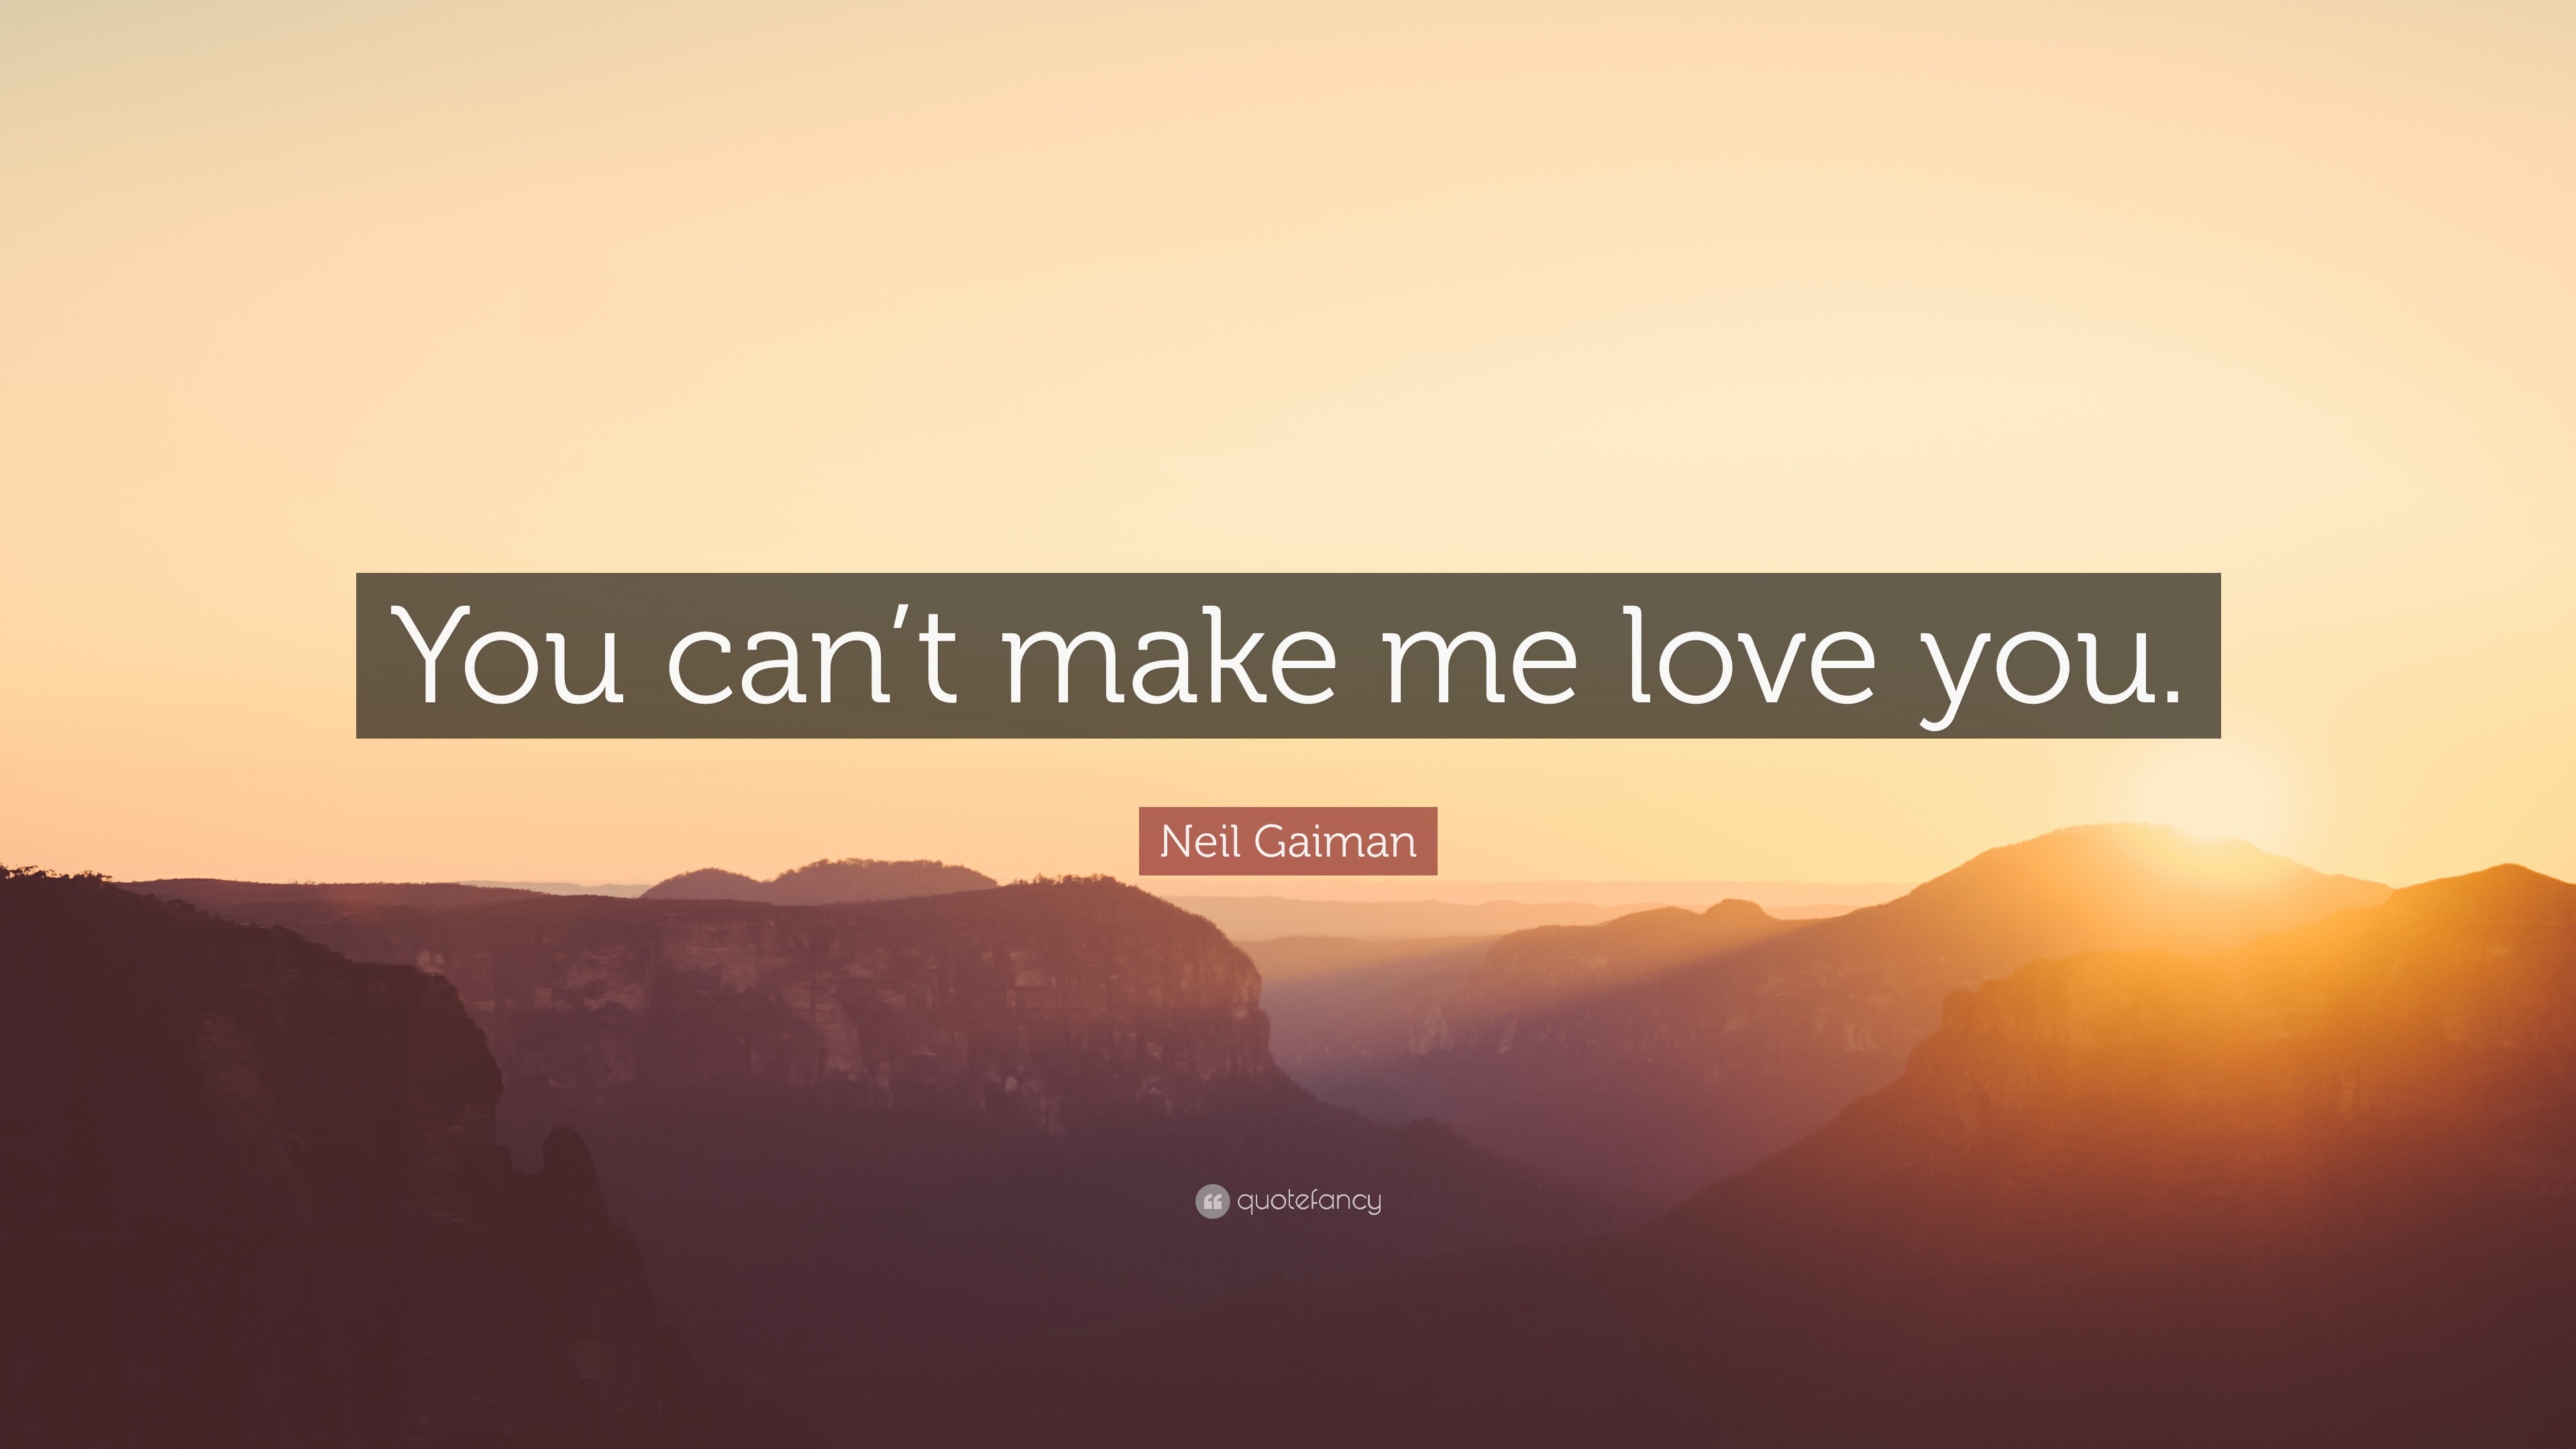 Neil Gaiman Quote “You can t make me love you ”